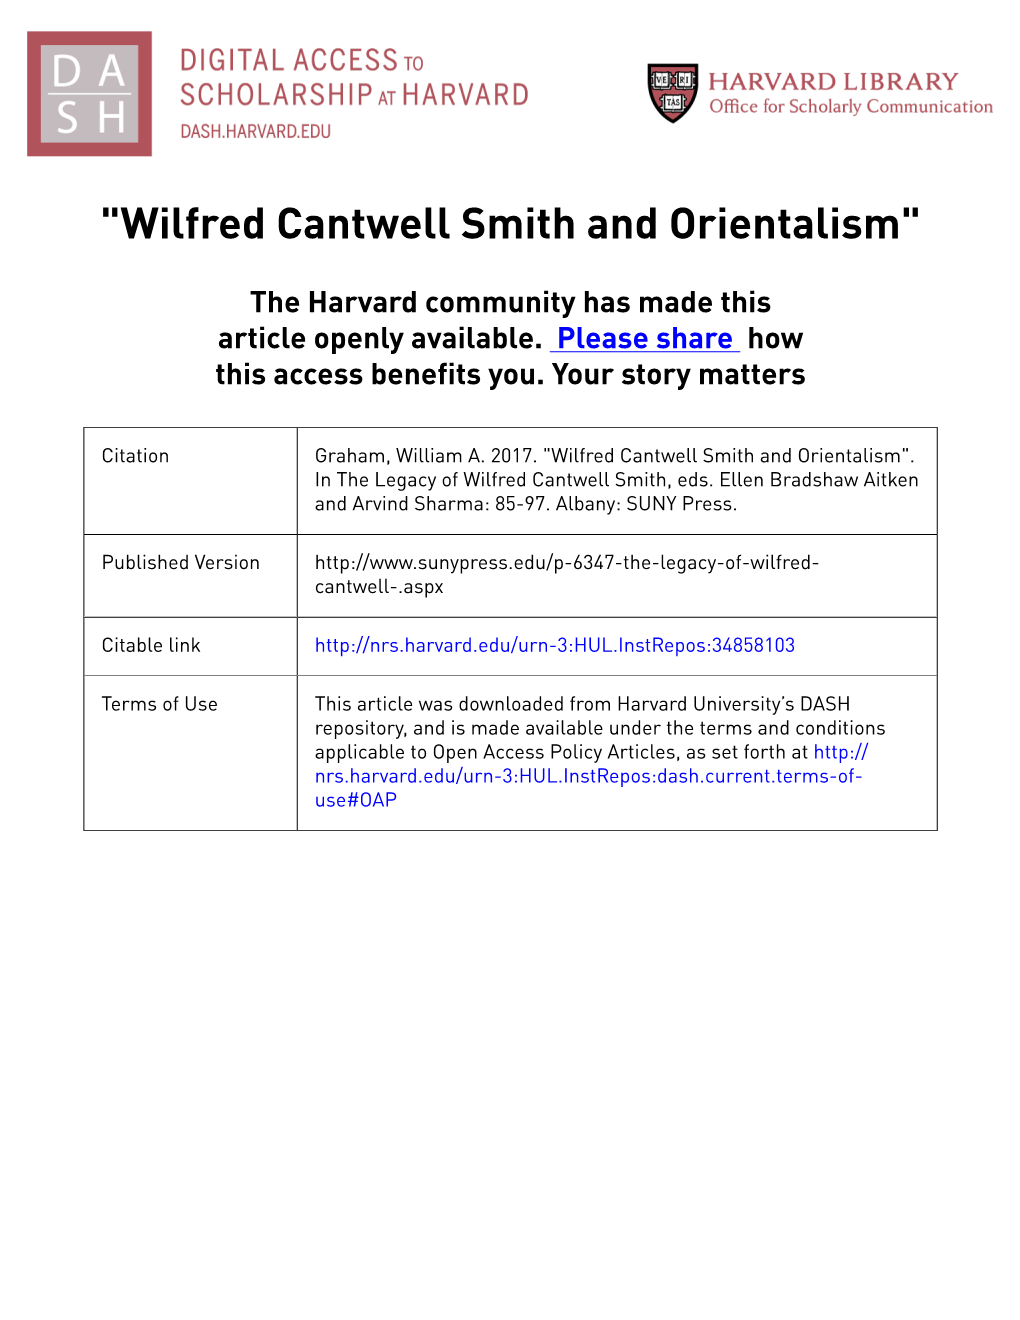 "Wilfred Cantwell Smith and Orientalism"